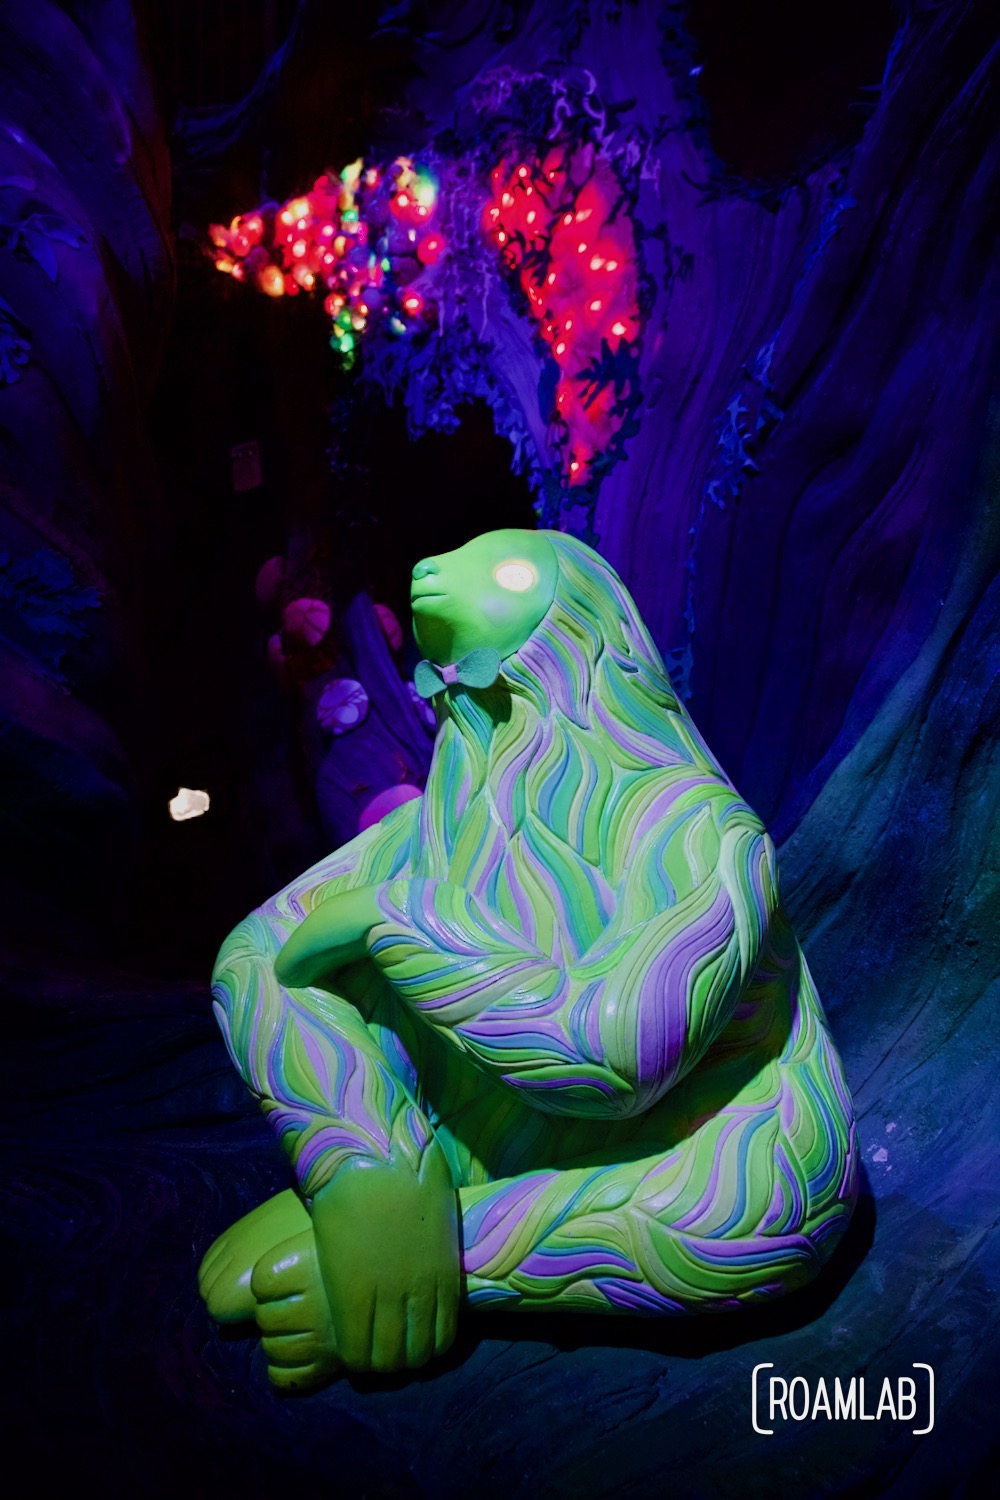 Psychedelic sloth sitting contemplatively in the colorful 6th dimensional world of Numina, part of Meow Wolf's Denver Colorado location, Convergence Station.